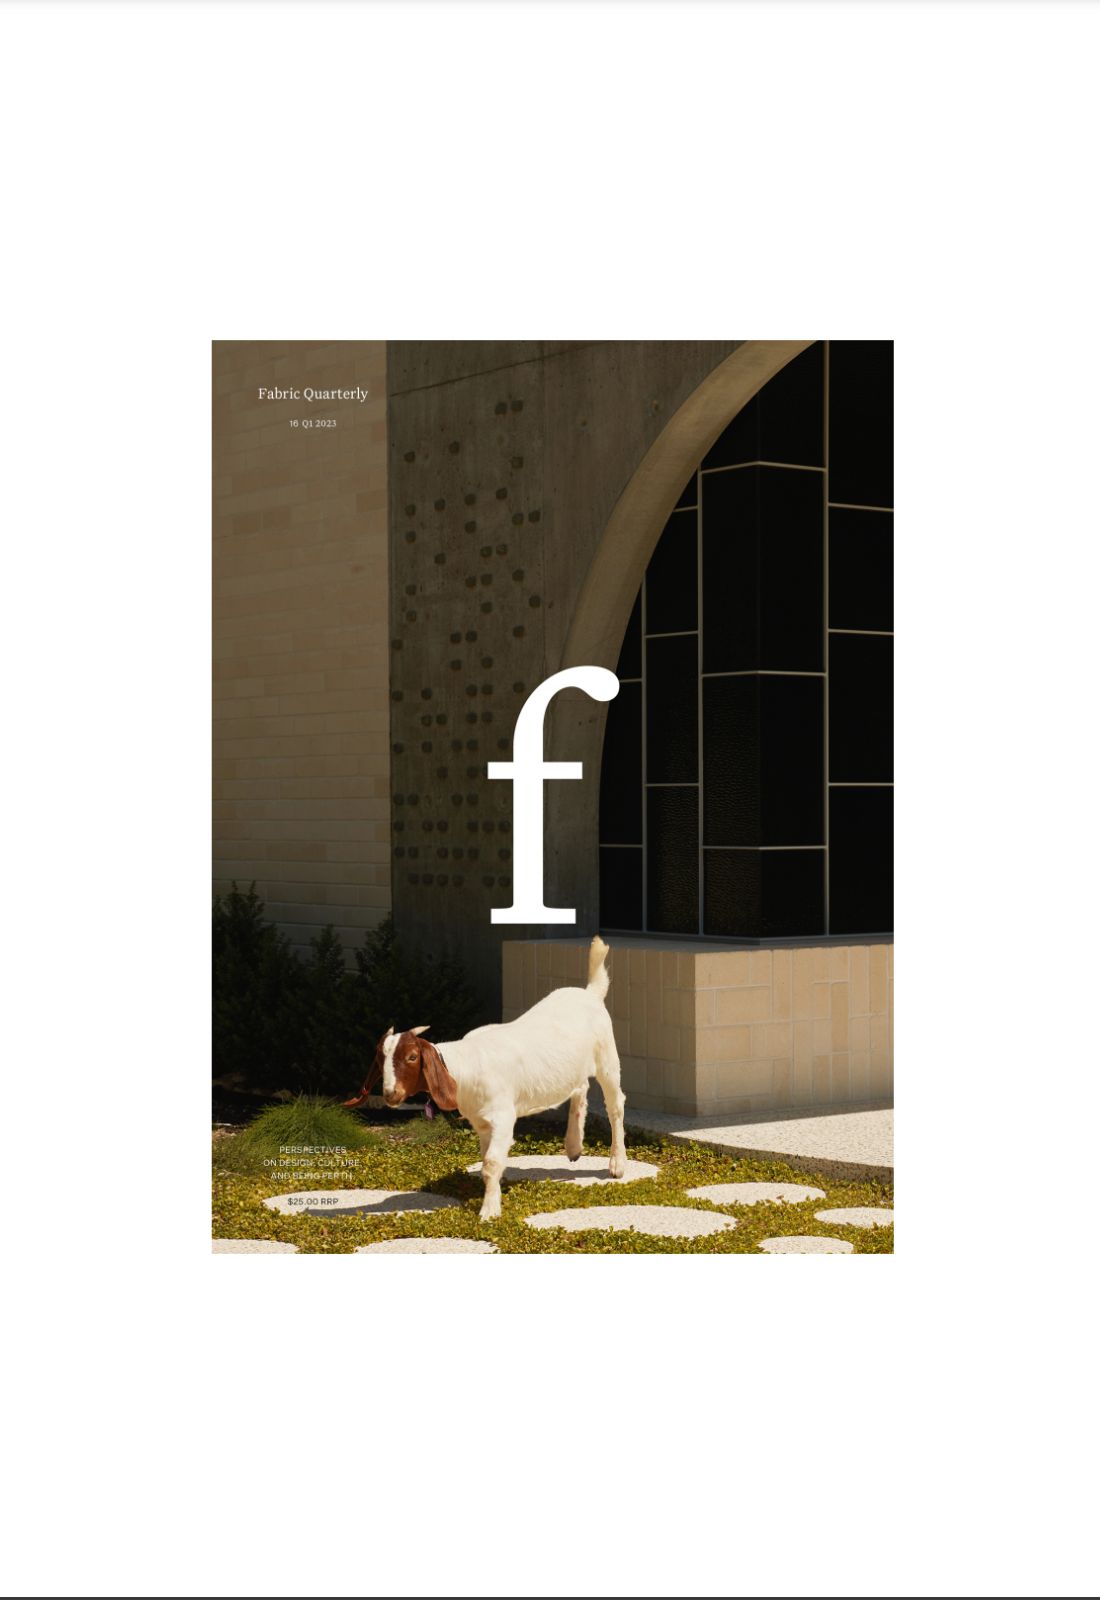 Fabric Quarterly Cover featuring 123 House designed by Neil Cownie Architect